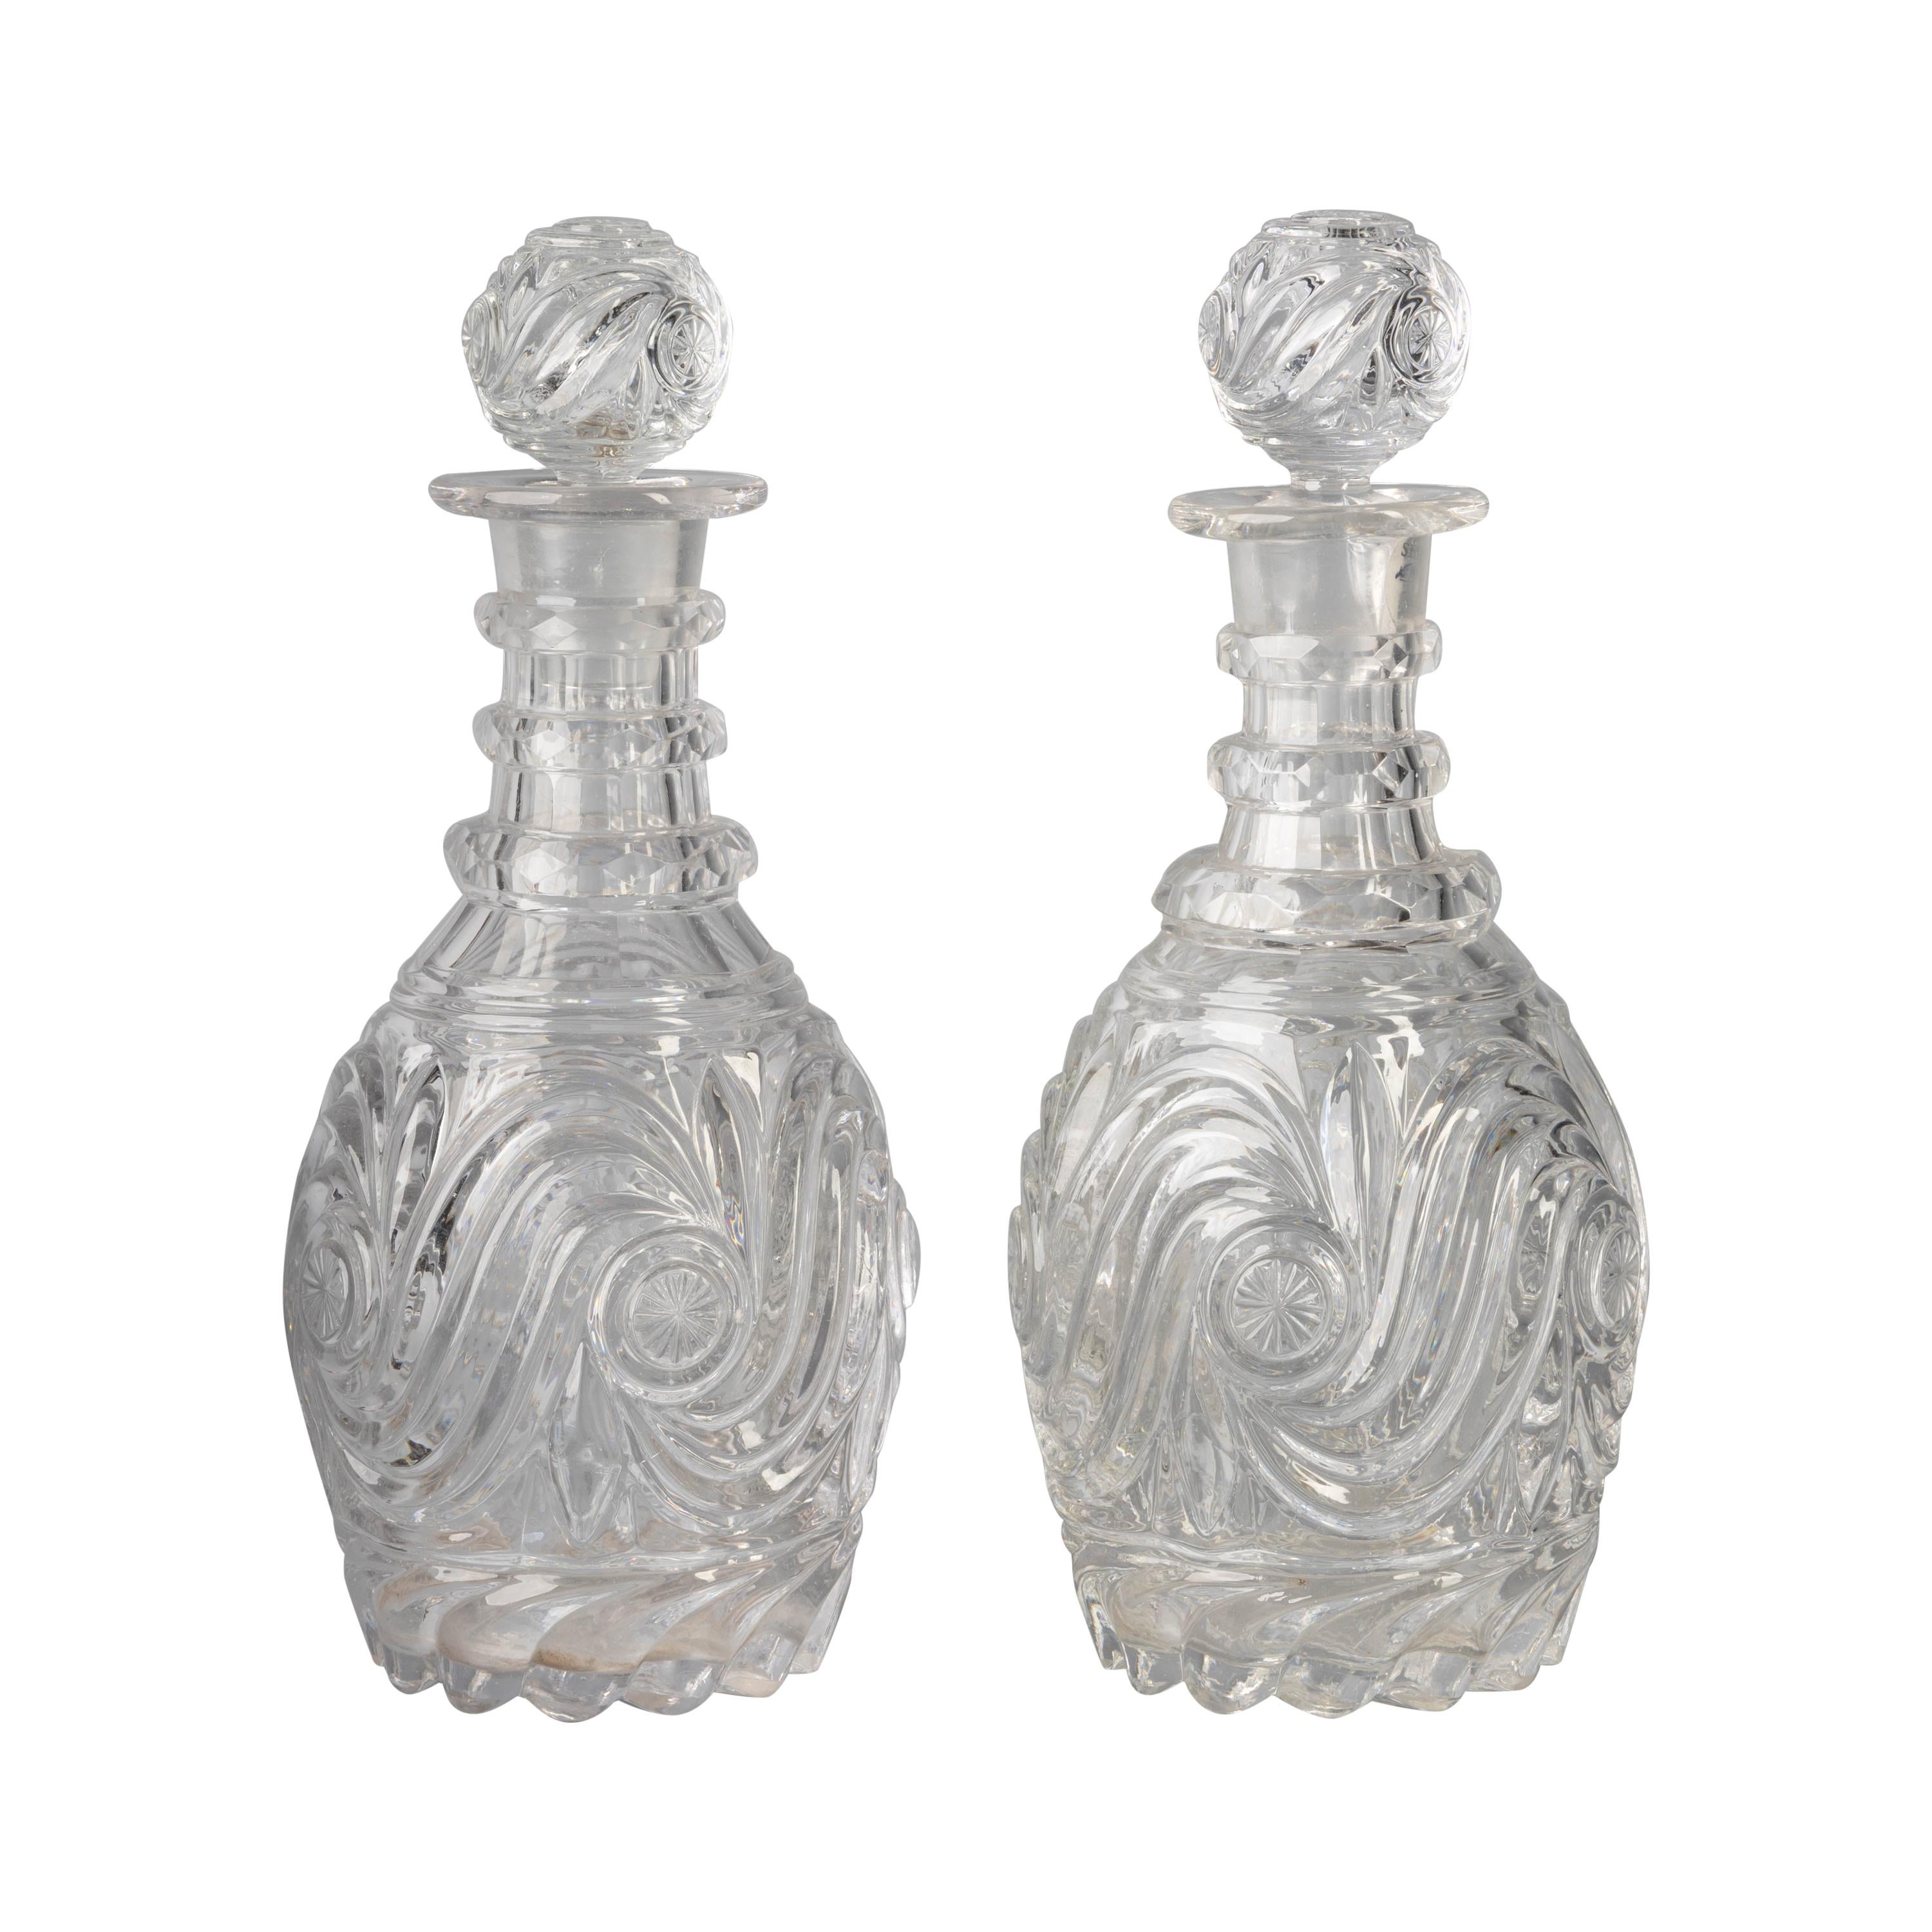 Pair of English Fancy-Cut Glass Decanters, circa 1840